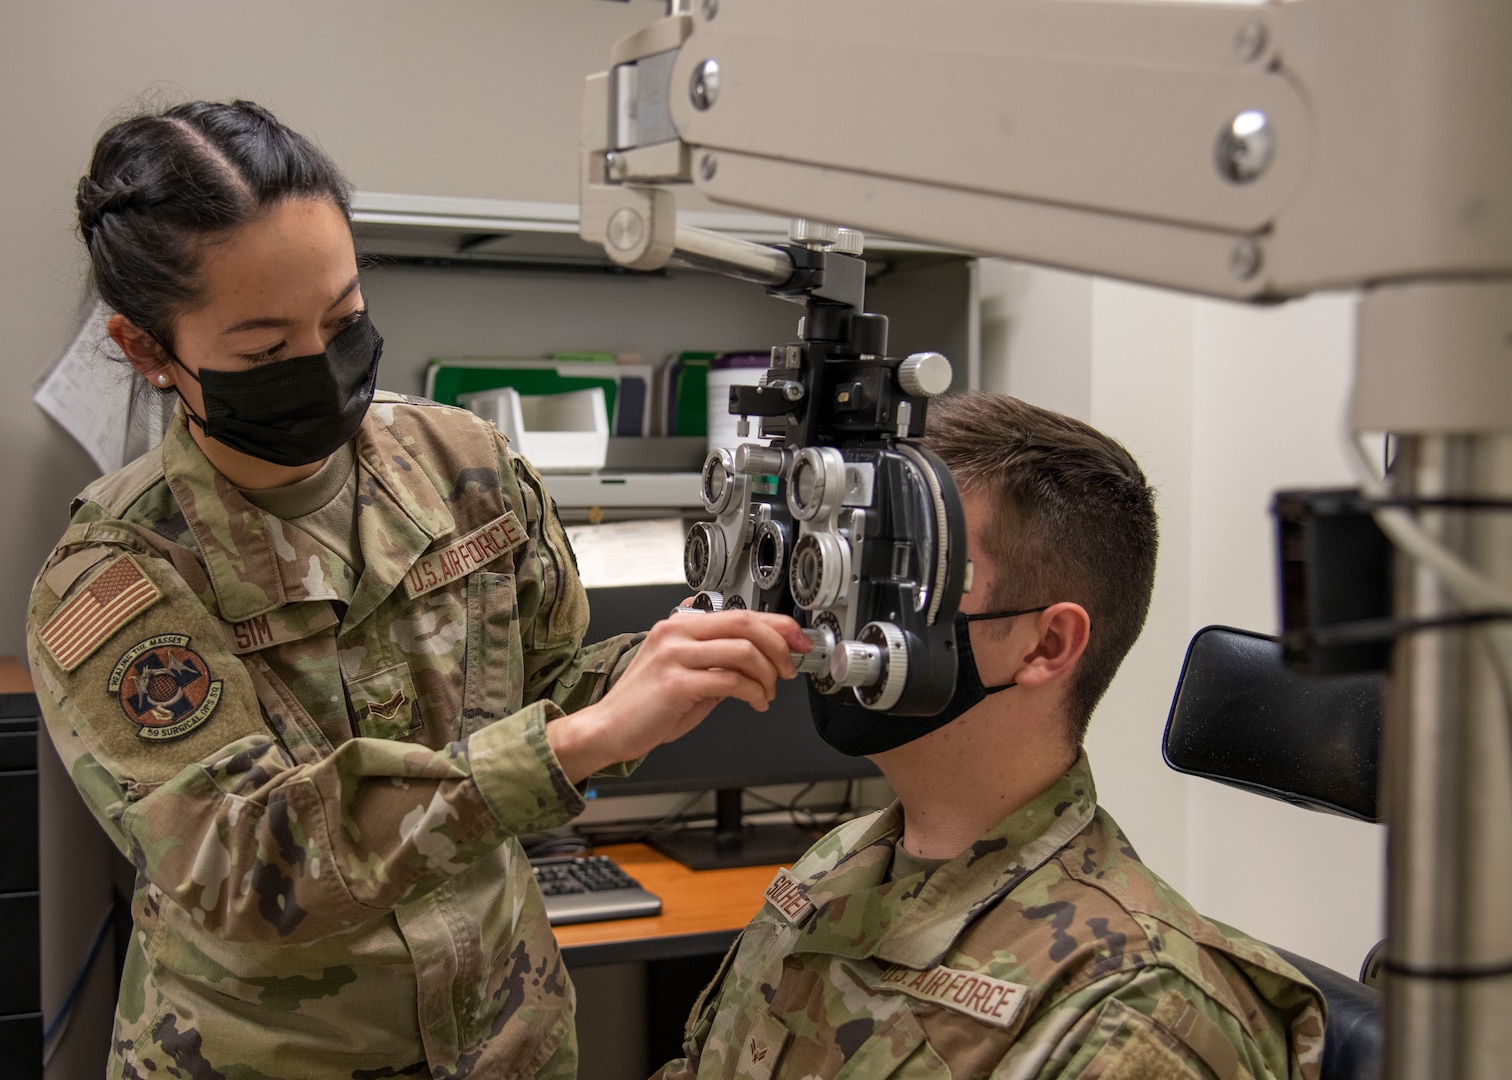 Airman 1st Class Samantha Sim, 59th Surgical Operations Squadron ophthalmic technician, refracts a patient’s eyes at the Ophthalmology Clinic in Wilford Hall Ambulatory Surgical Center, Joint Base San Antonio-Lackland, Jan. 19, 2023. The 59th SGC tests and treats to prevent vision loss, promote a better quality of life and support a worldwide qualified force. (U.S. Air Force photo by Senior Airman Melody Bordeaux)